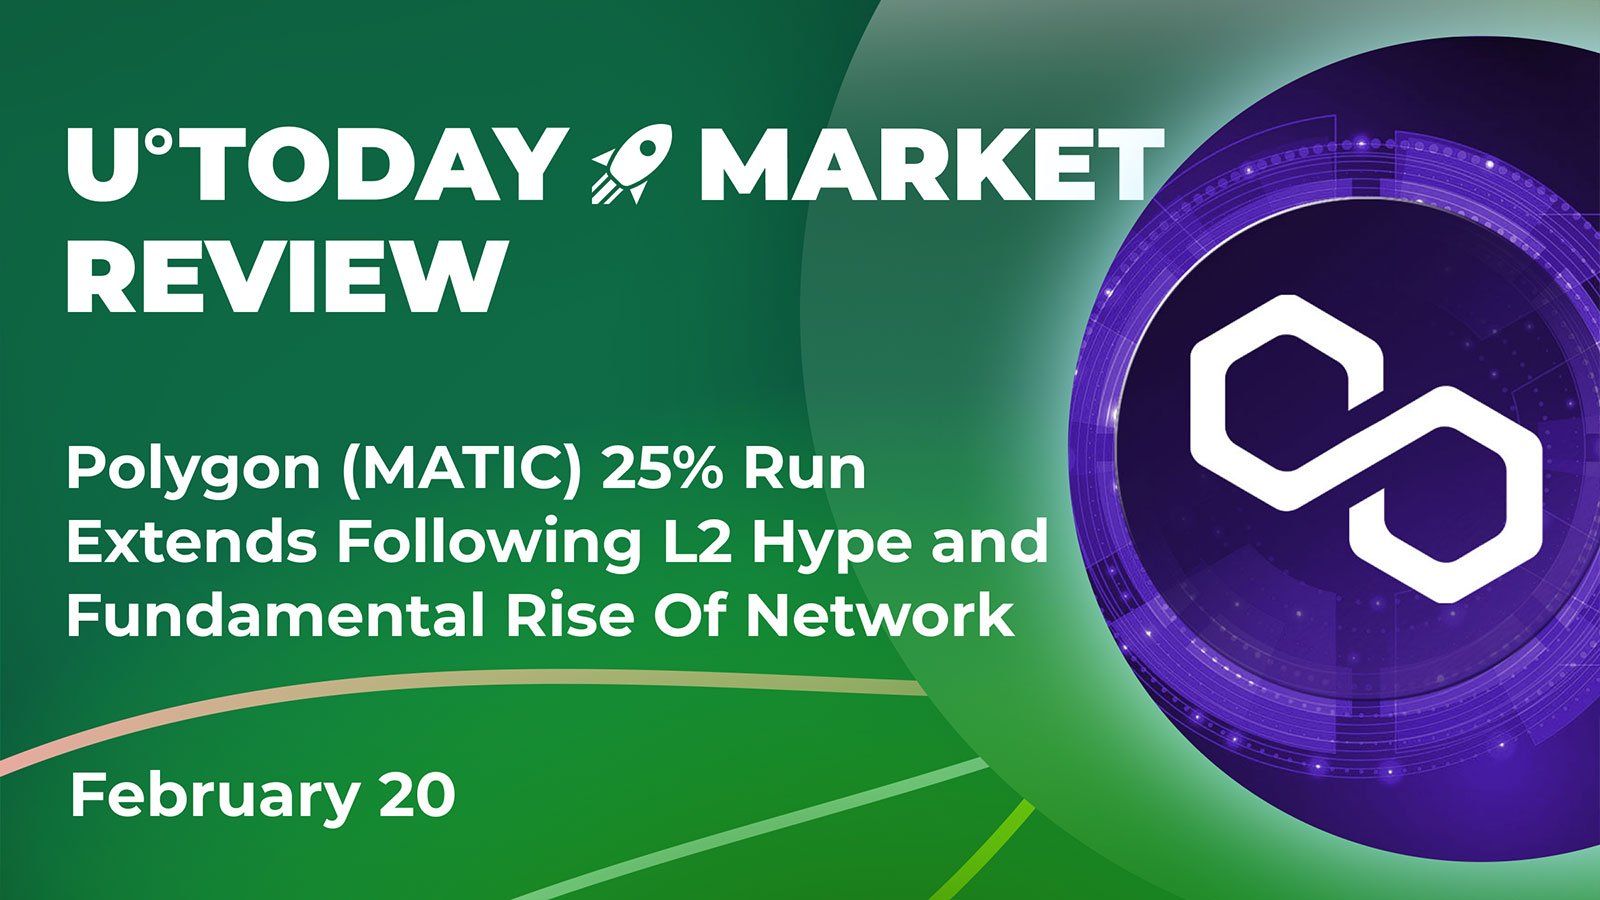 Polygon (MATIC) 25% Run Extends Following L2 Hype and Fundamental Rise of Network